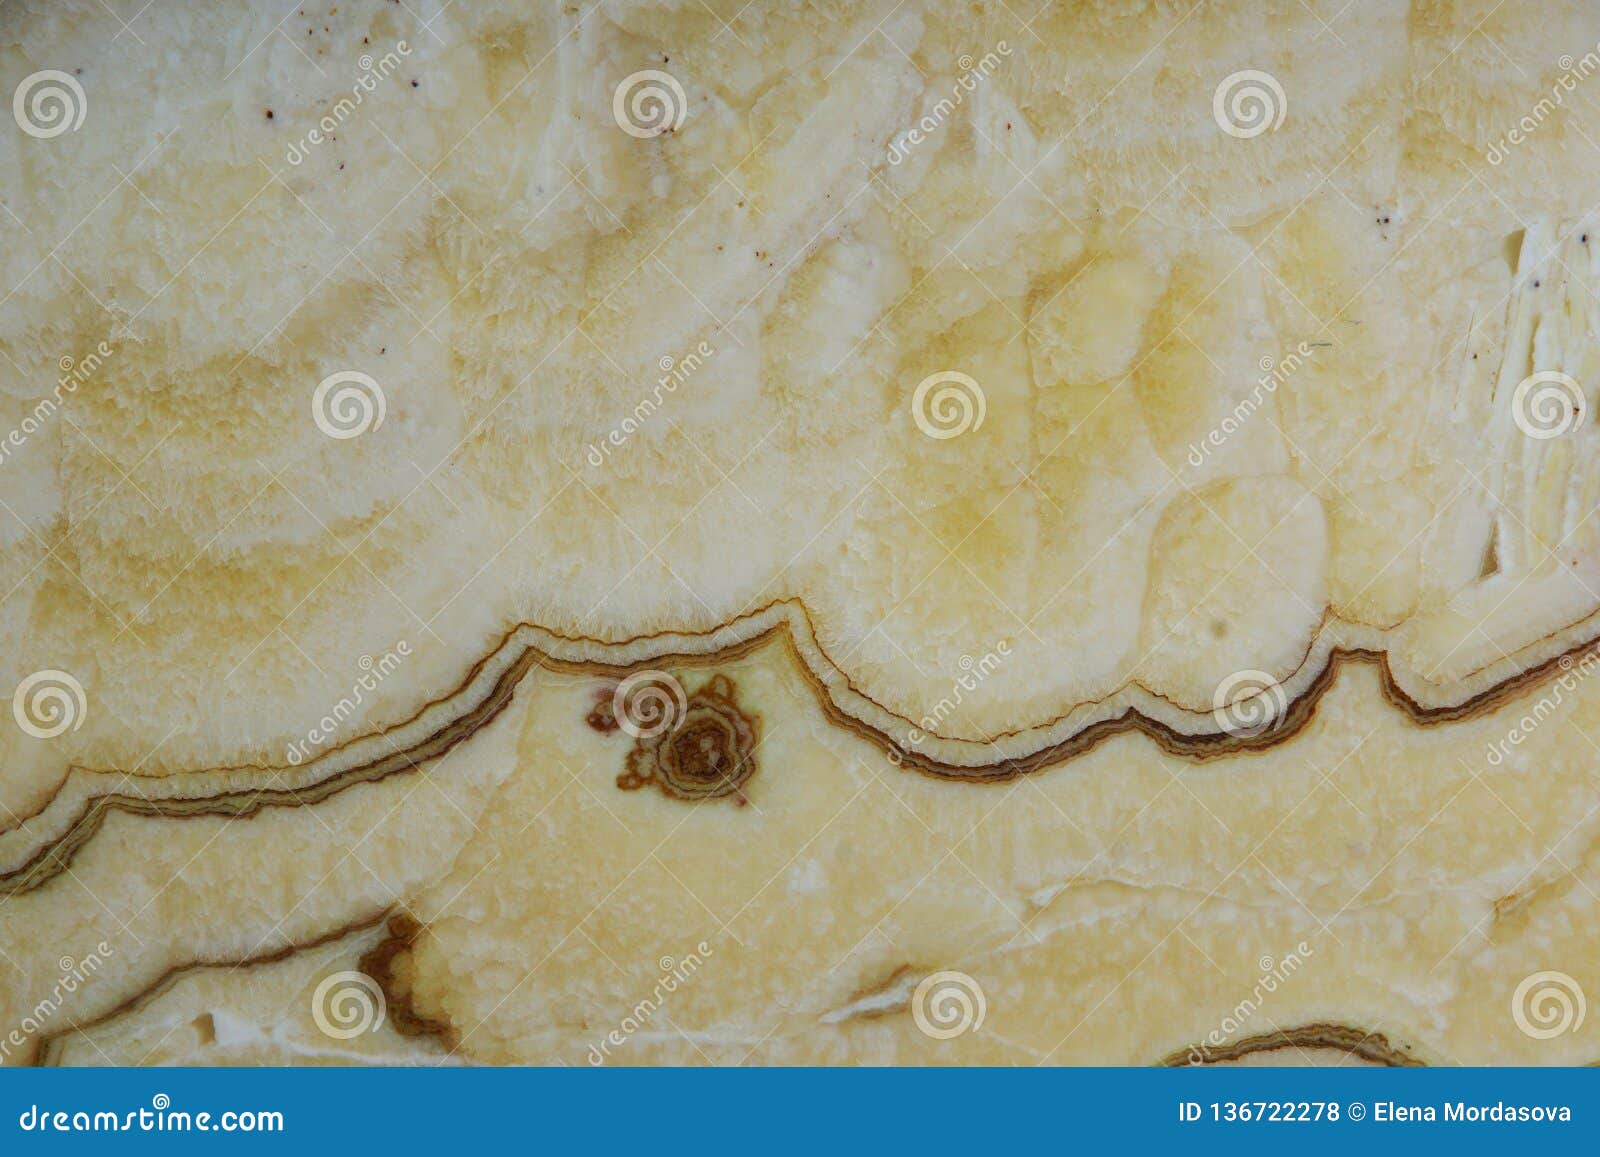 background from a light yellow natural stone onyx with bubbles and stains on the surface is called onice arco iris